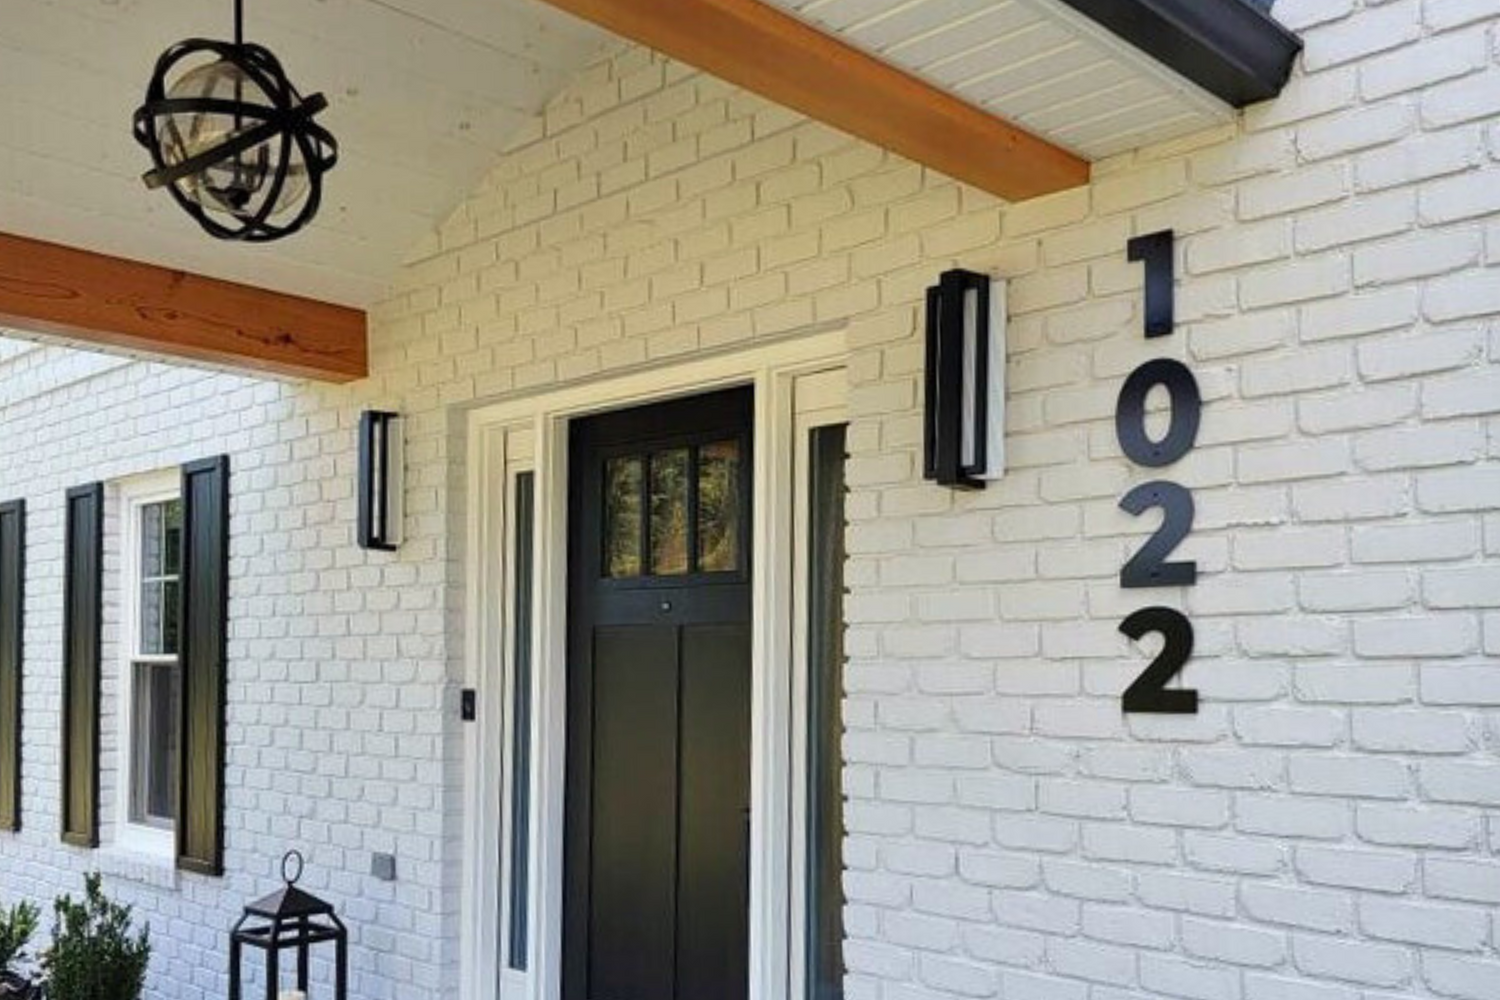 BOLD RETRO house numbers